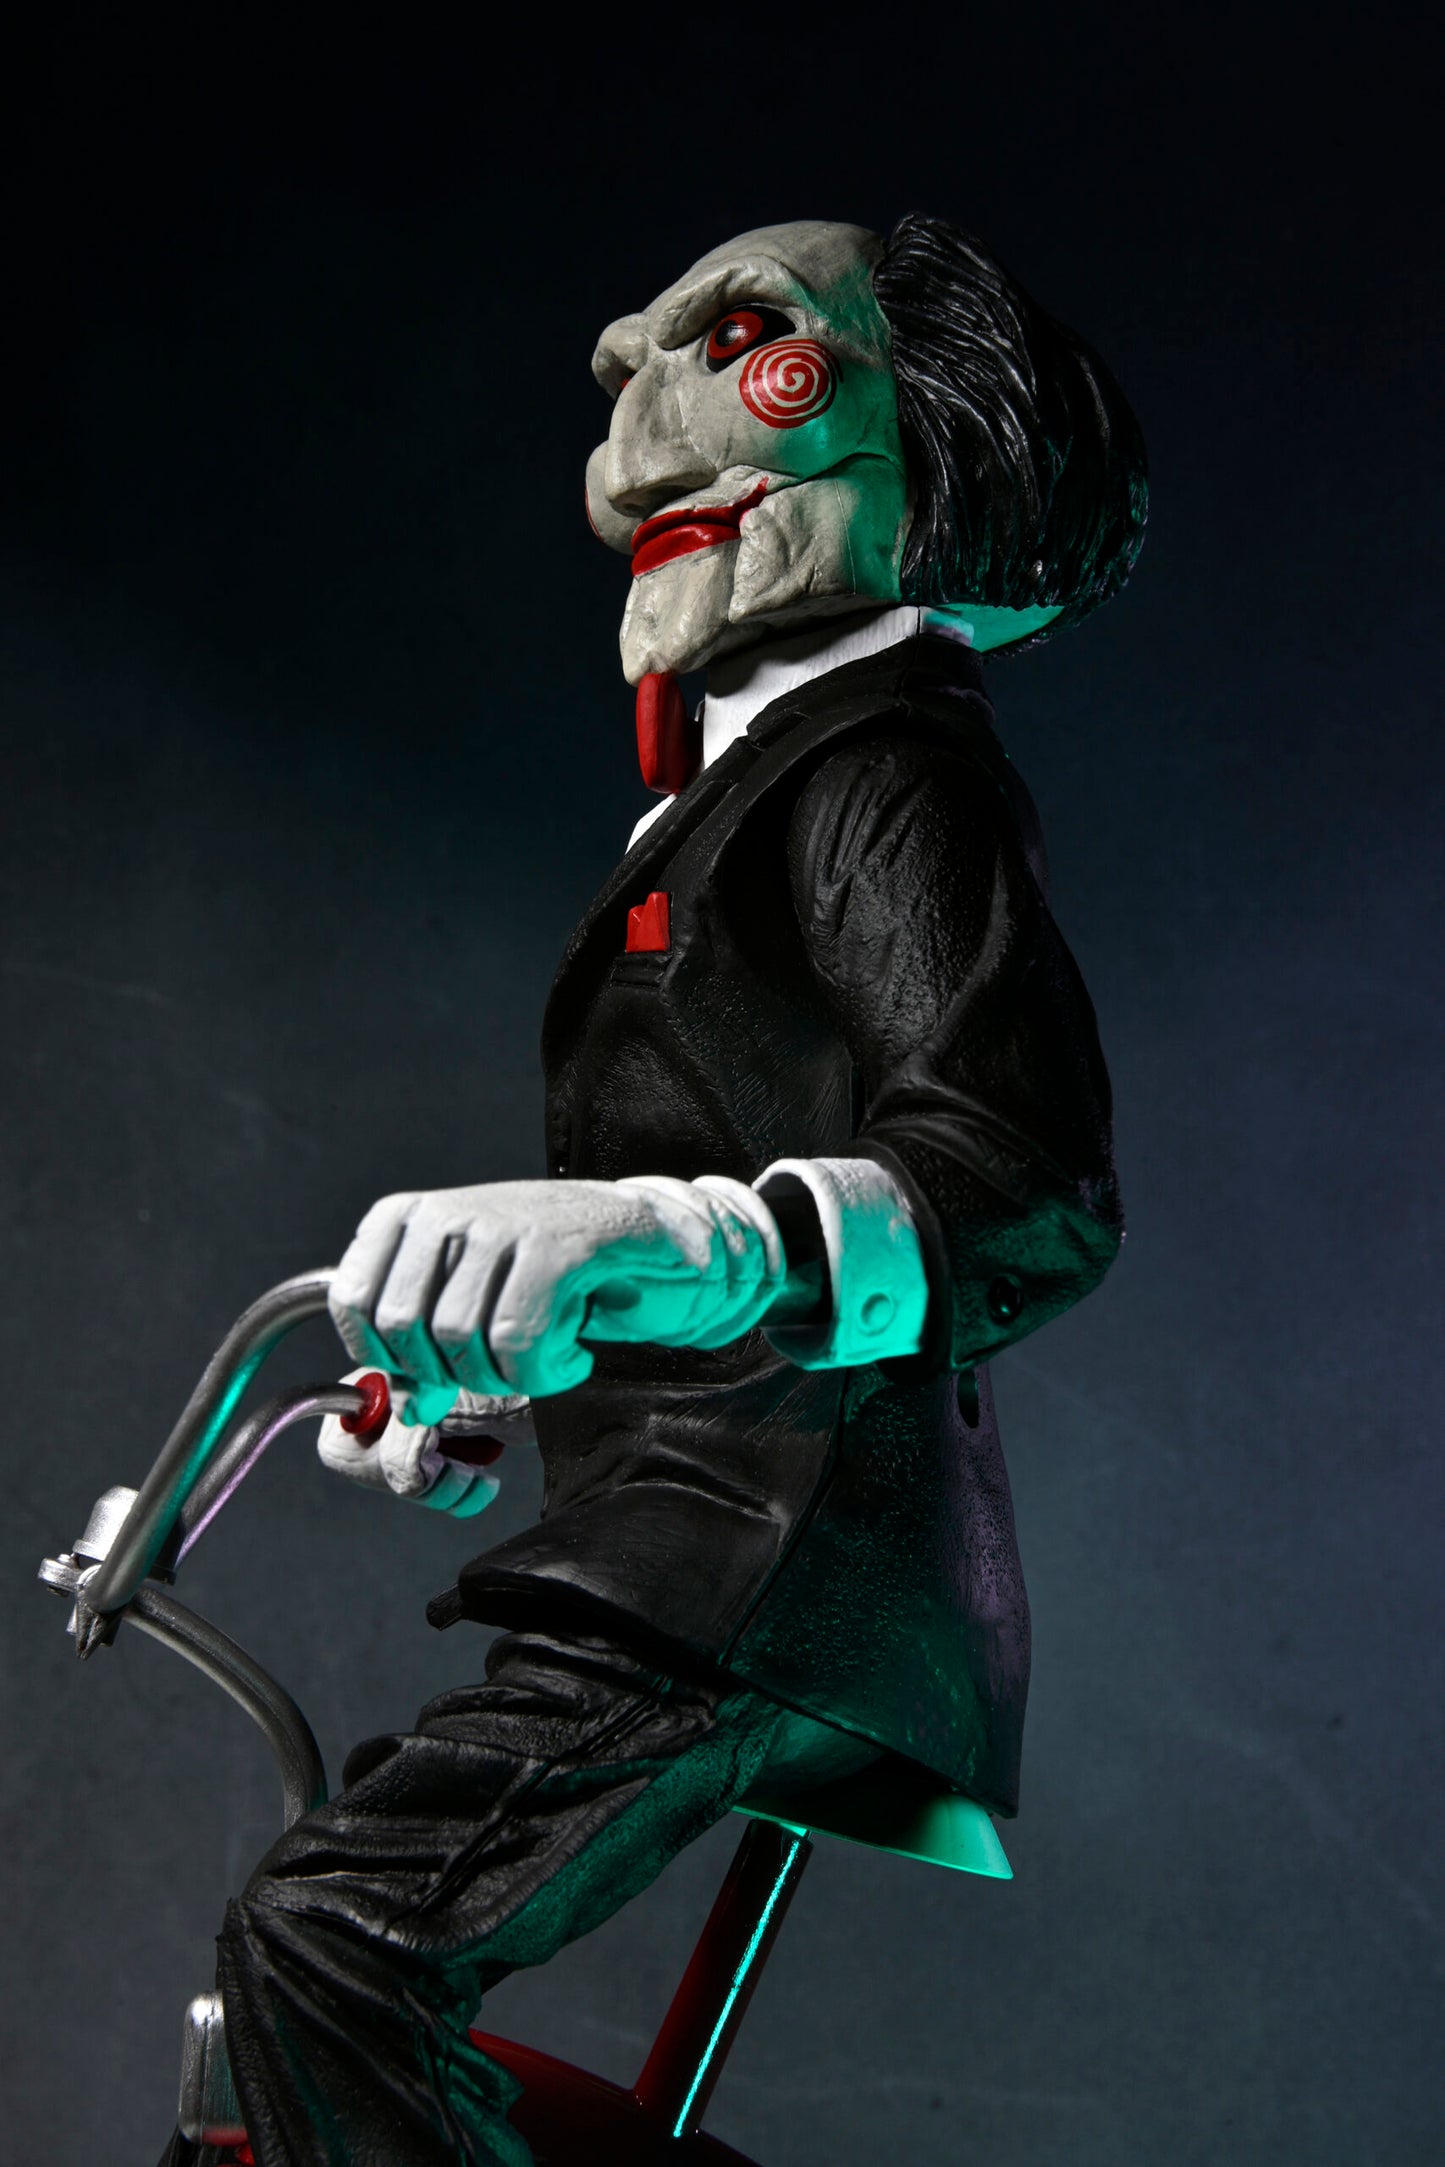 NECA - SAW Billy The Puppet with Tricycle 12 inches.